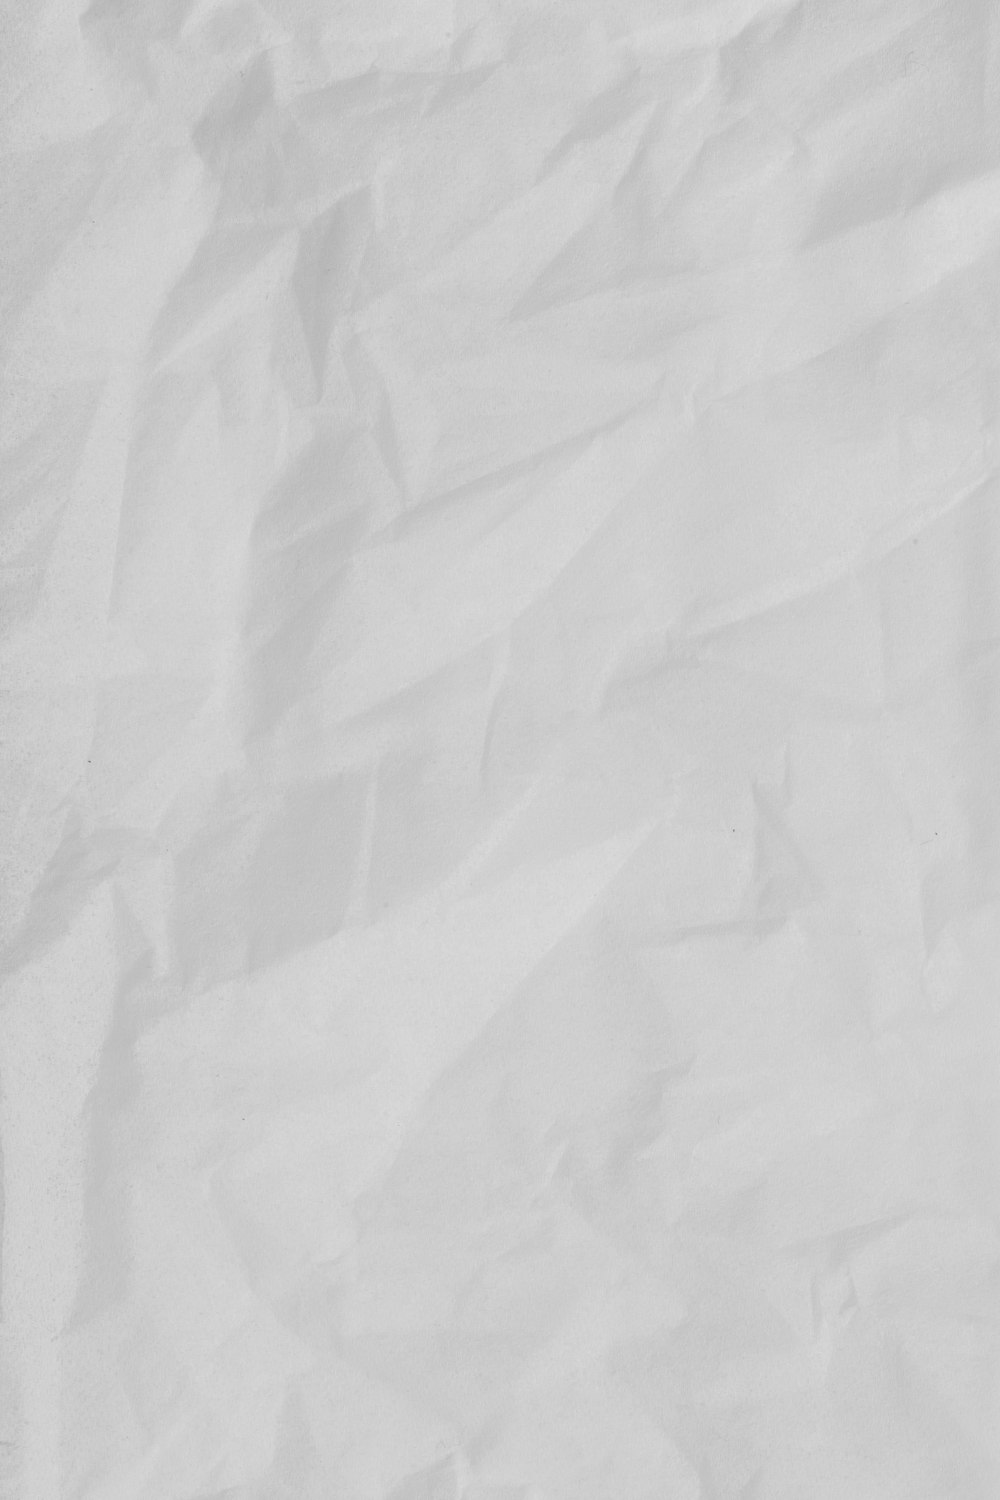 500 Paper Texture Pictures Hd Download Free Images On Unsplash